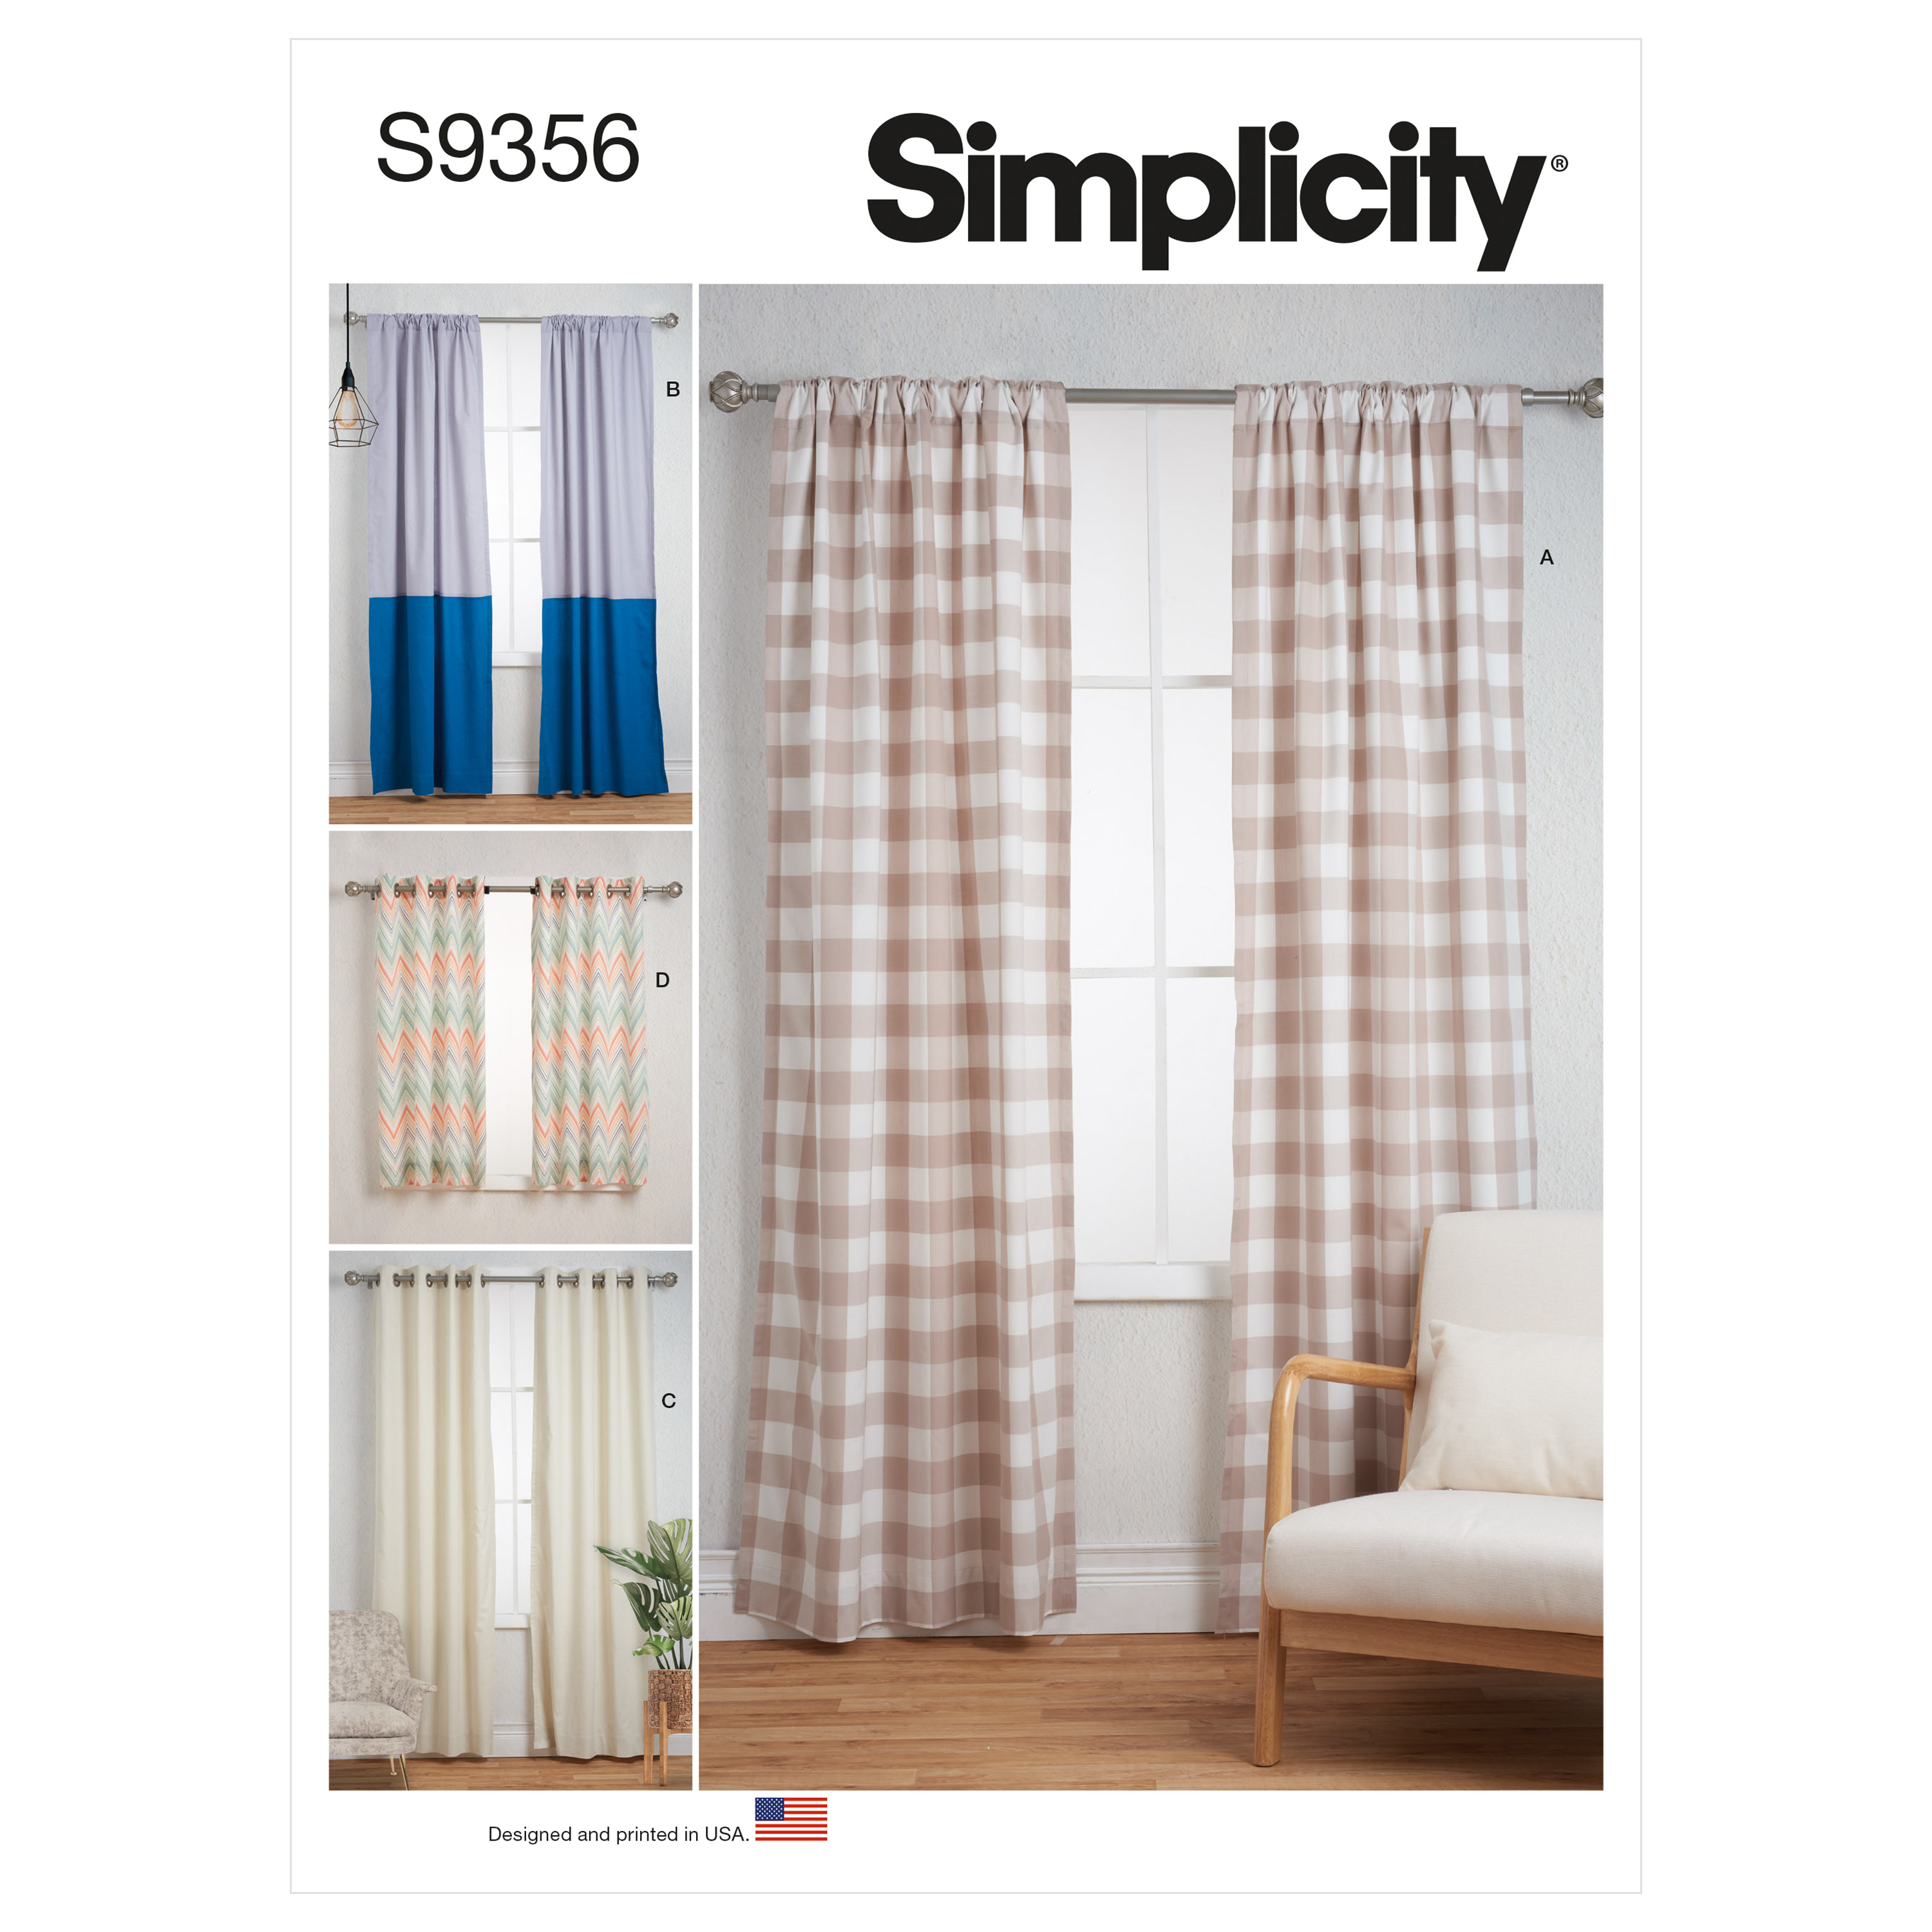 Simplicity 9986 Sewing Pattern for Dummies, Window Shades, One